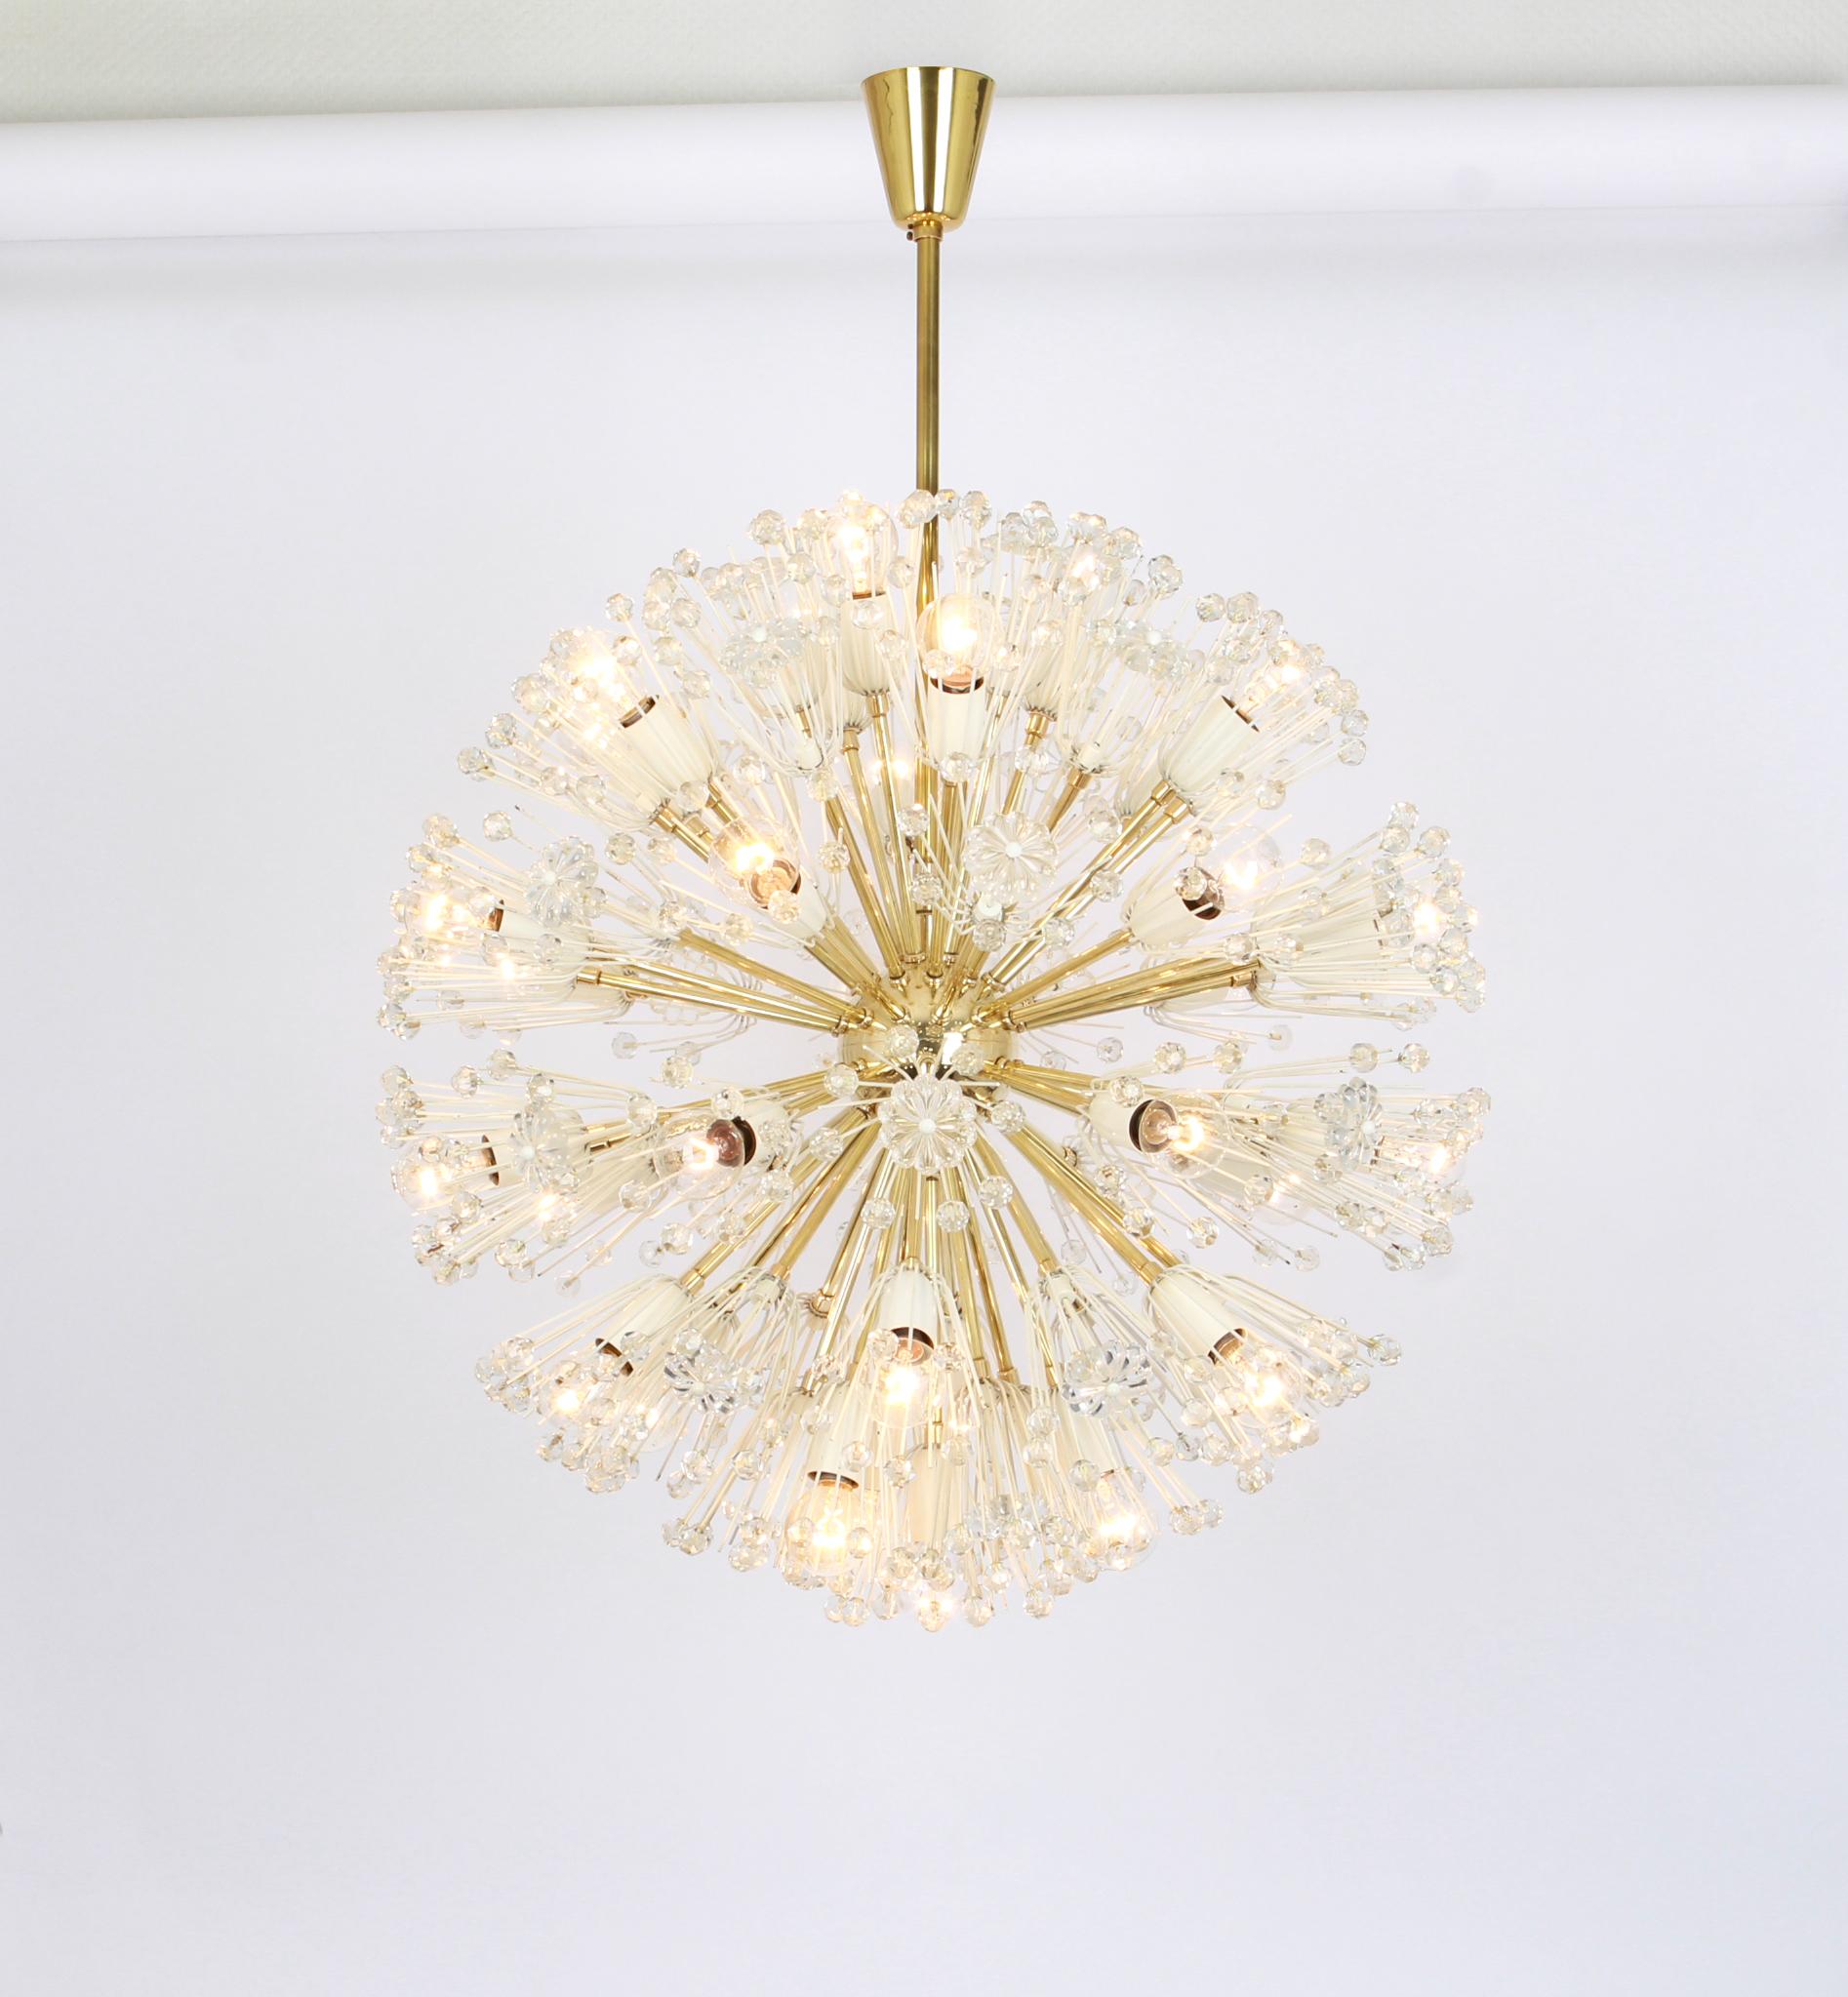 Beautiful large starburst brass chandelier with hundreds of crystals designed by Emil Stejnar for Nikoll, manufactured in Austria, circa 1960s.

Sockets: 32 x E14 bulbs.
Very good condition.

Drop rod can be adjusted as required, free of